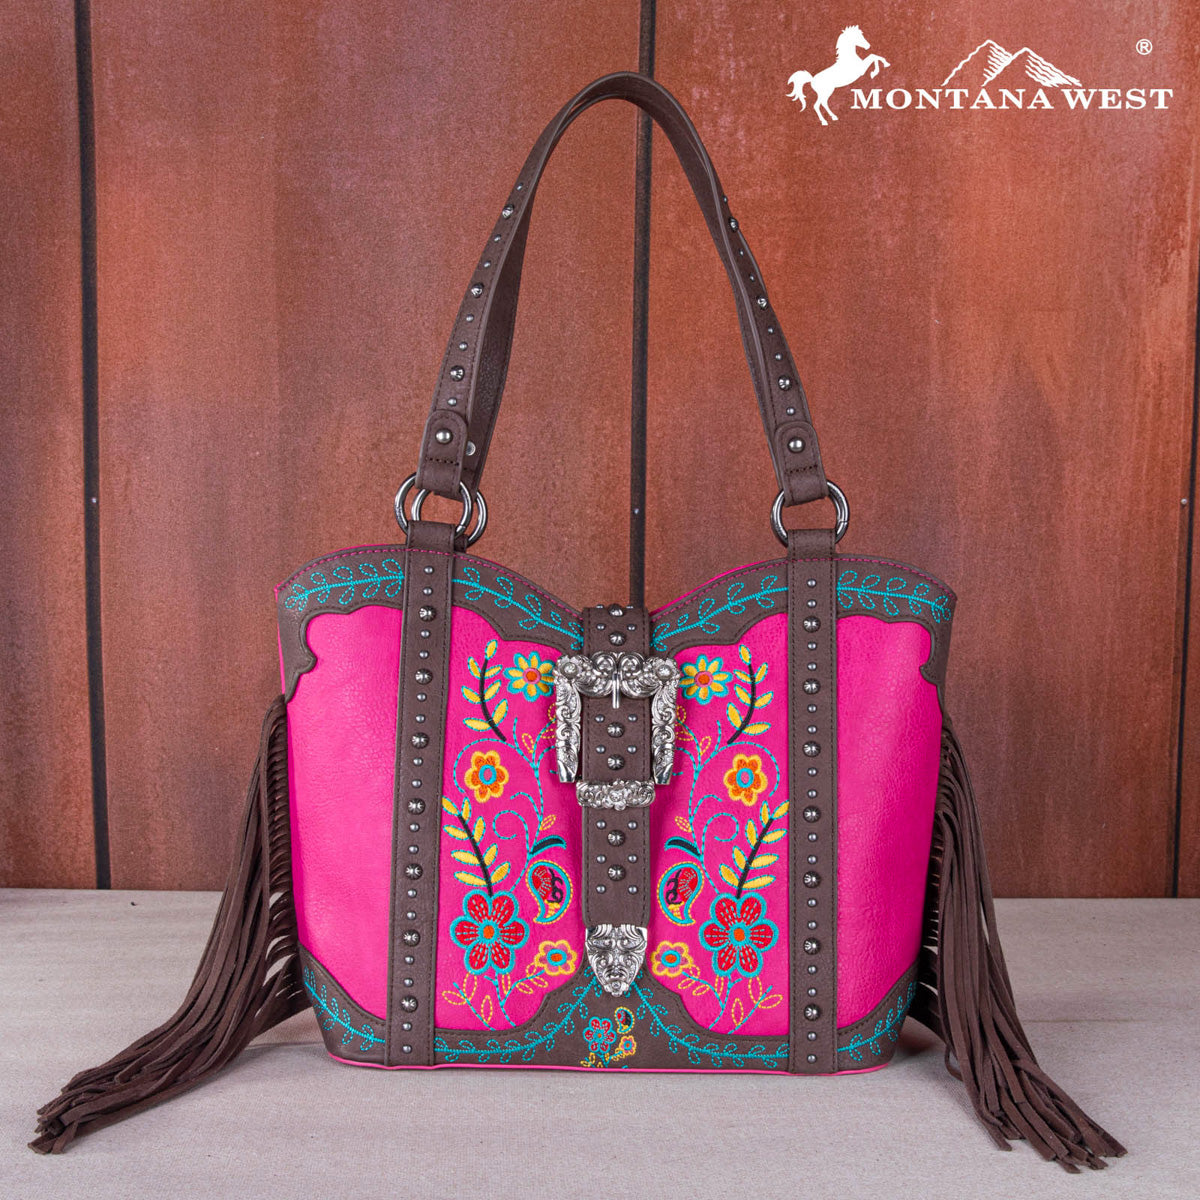 Montana West Floral Embroidered Concealed Carry Tote